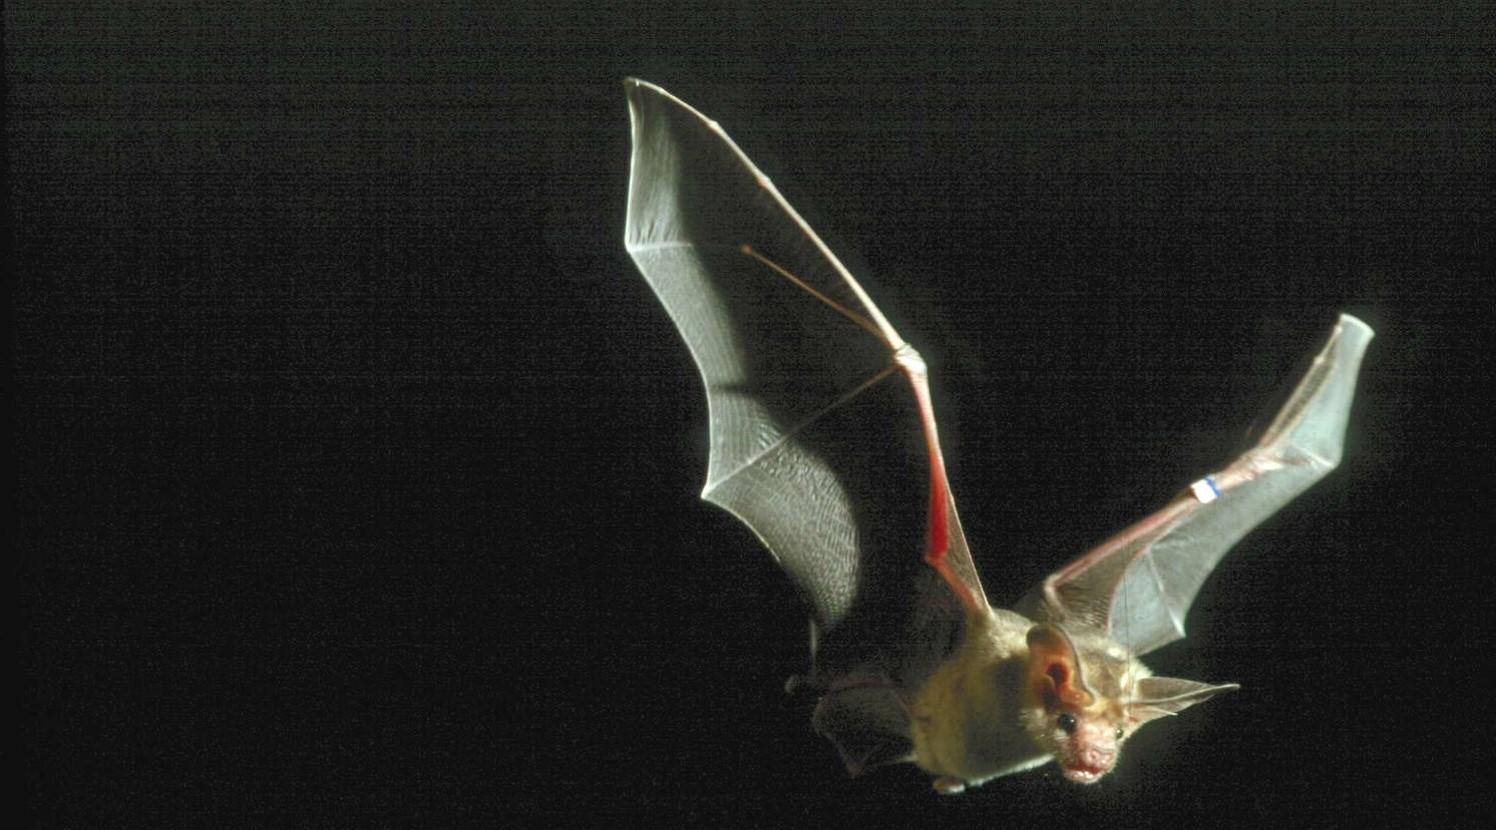 Pallid Bat Becomes One of California’s New State Symbols